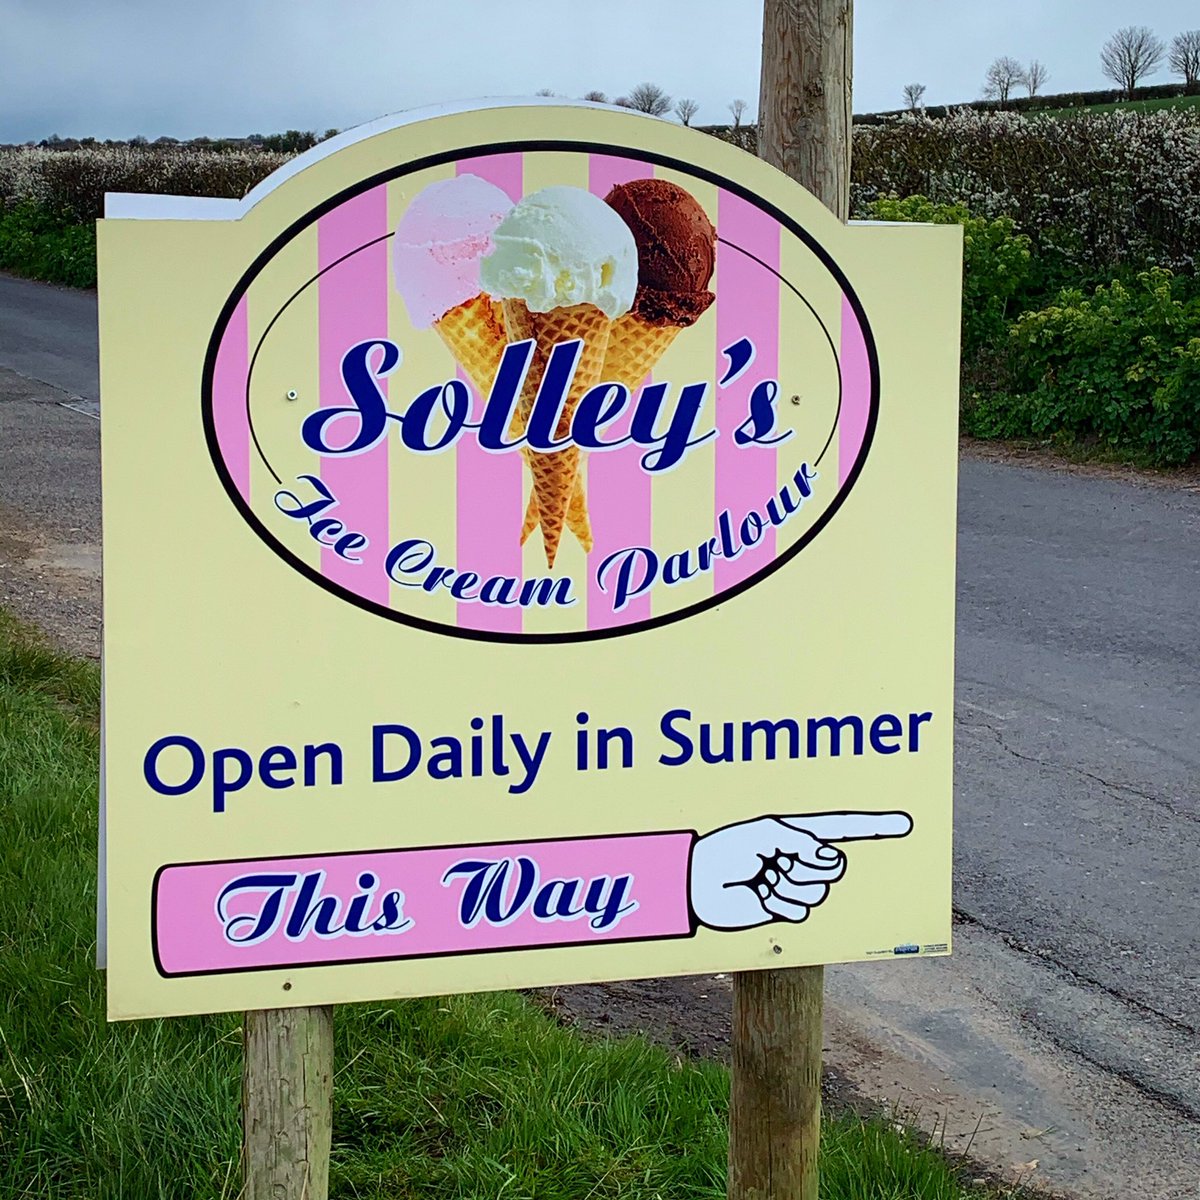 The signs are out so it’s official, we are OPEN for the summer season ☀️🍦🙌🏻

The Ice Cream Parlour is open daily 11am - 4pm for takeaway ice cream and hot & cold drinks. Find us at The Dairy, Church Lane, Ripple, Kent CT14 8JL.

#IceCreamParlour #VisitKent